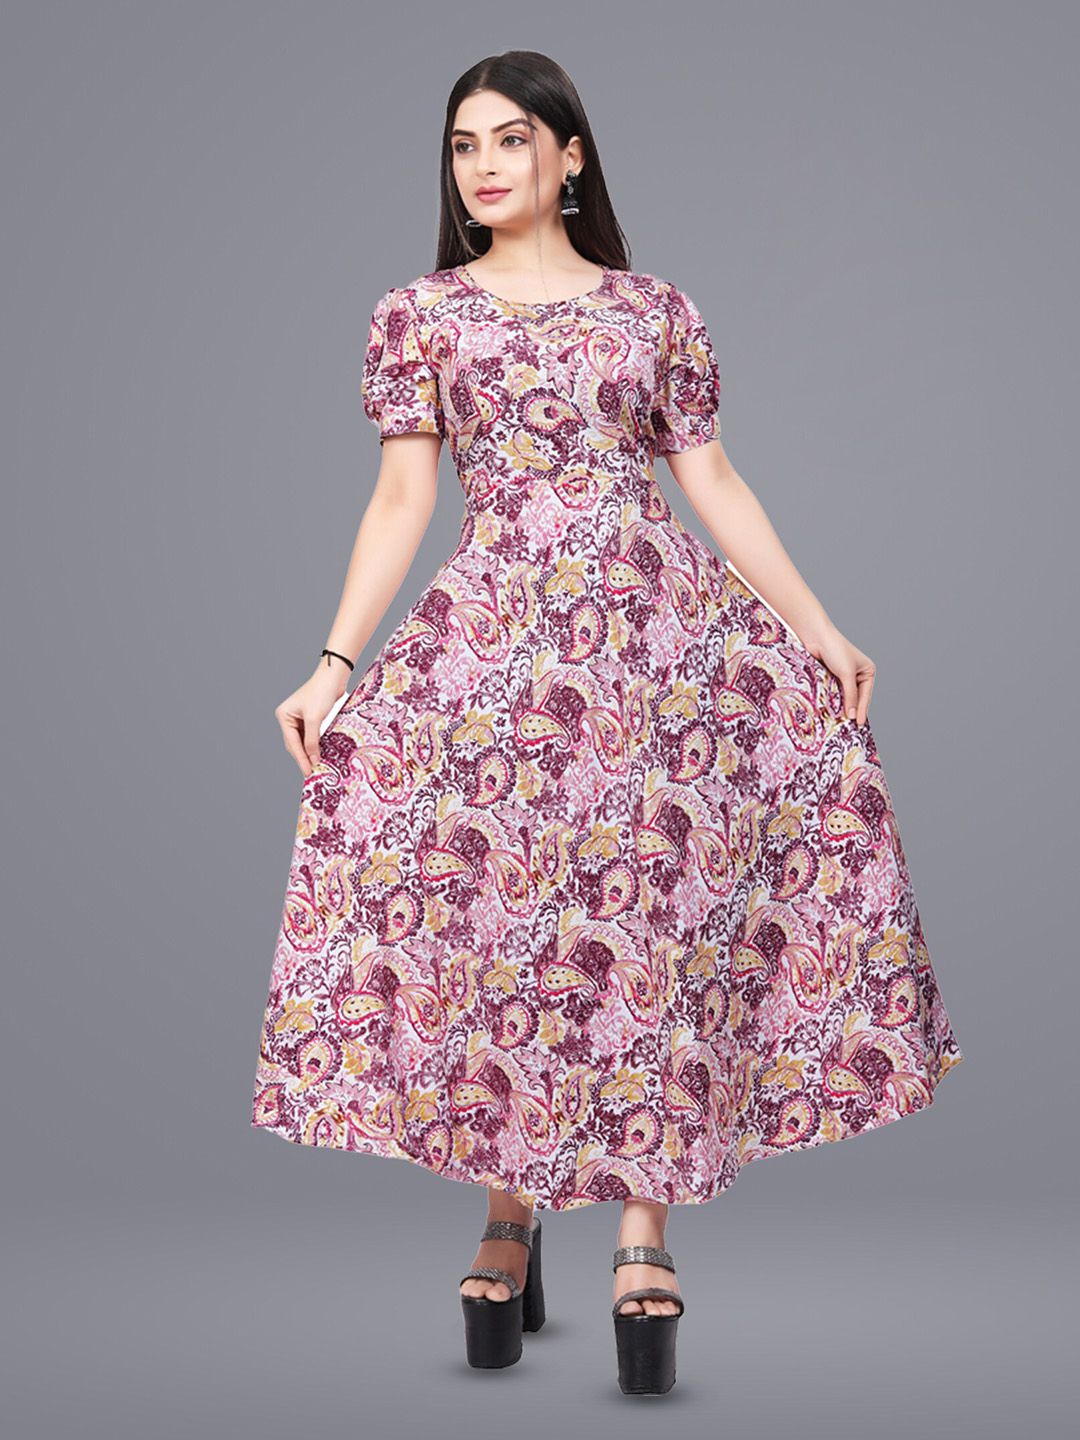 N N ENTERPRISE Pink Ethnic Motifs Print Puff Sleeve Fit & Flare Maxi Dress Price in India